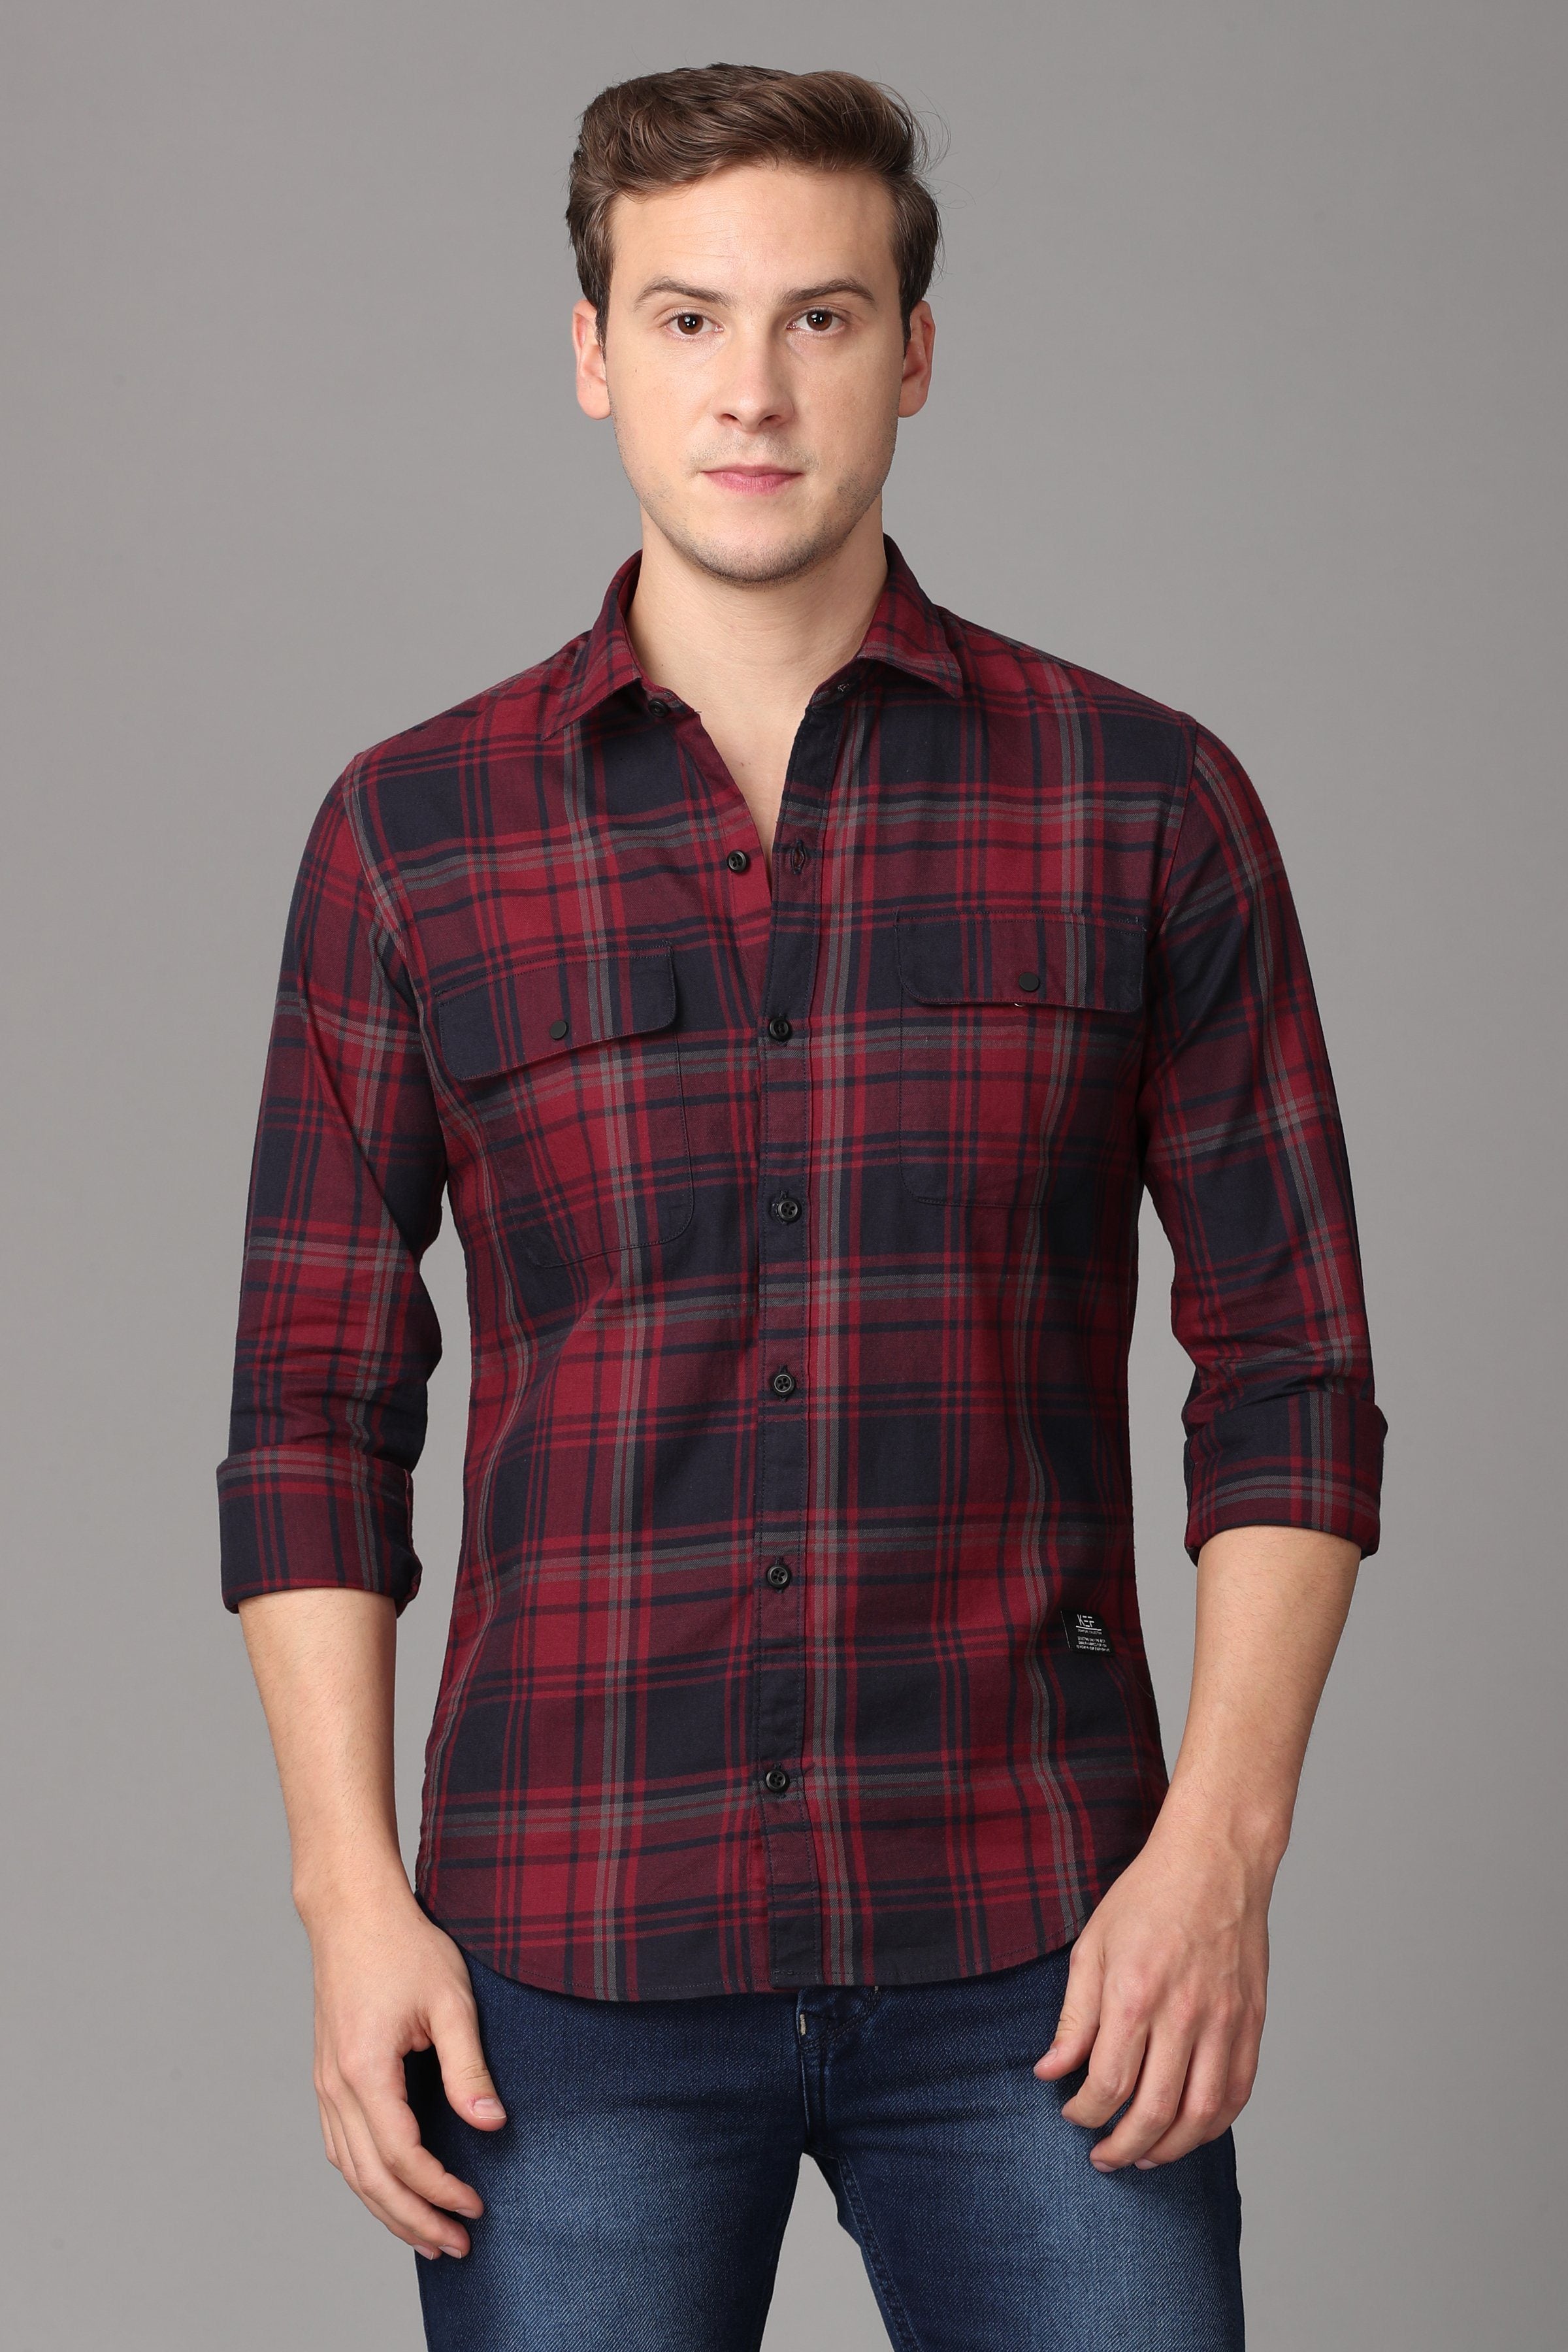 Red and Black Checked Casual Shirt Shirts KEF S 